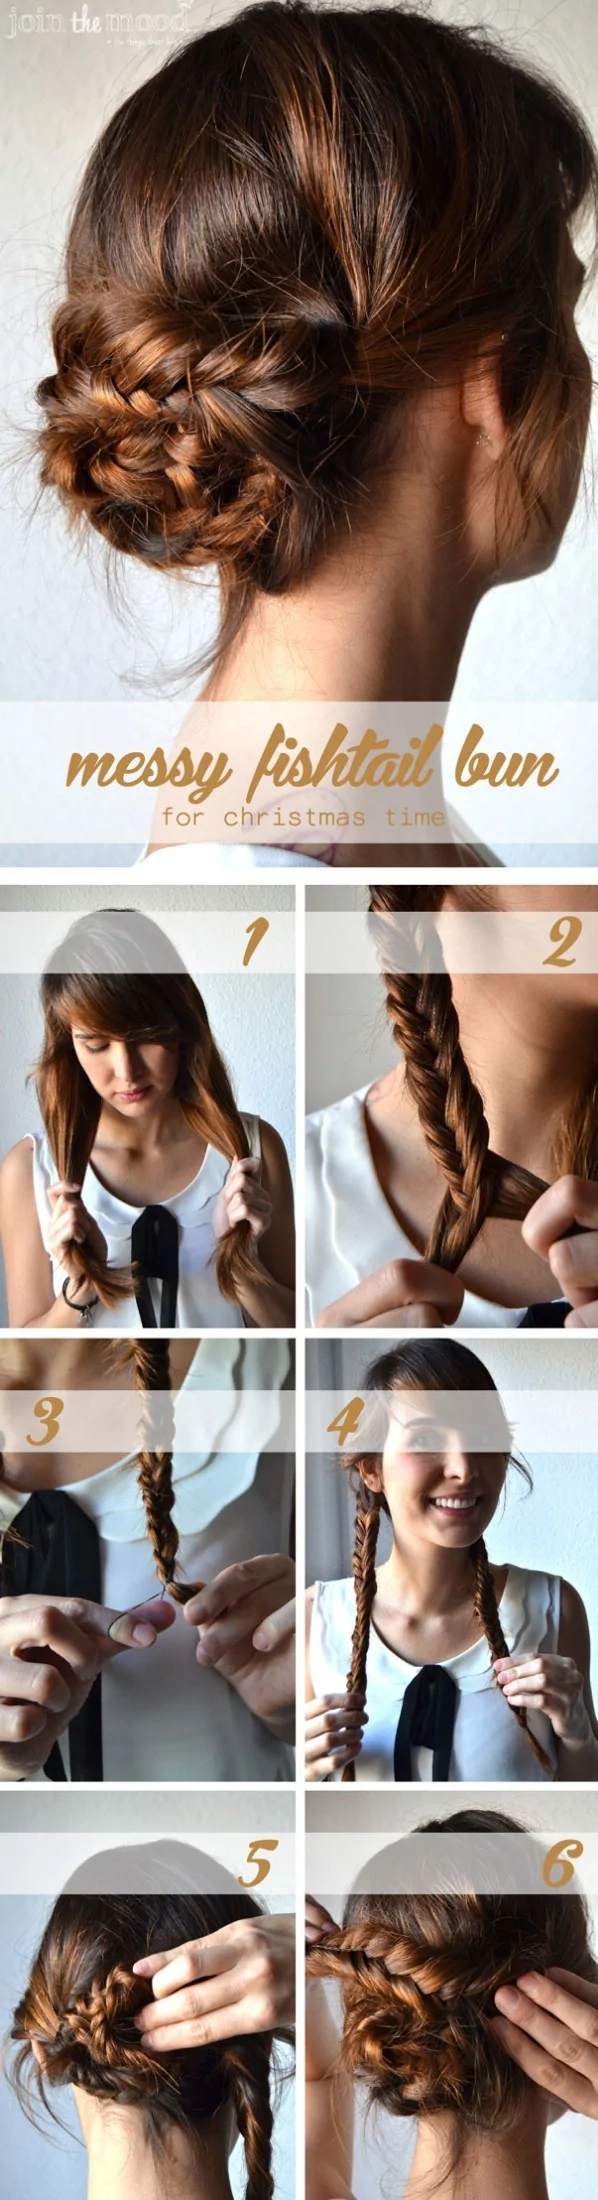 Fishtail braid up hairstyle tutorial